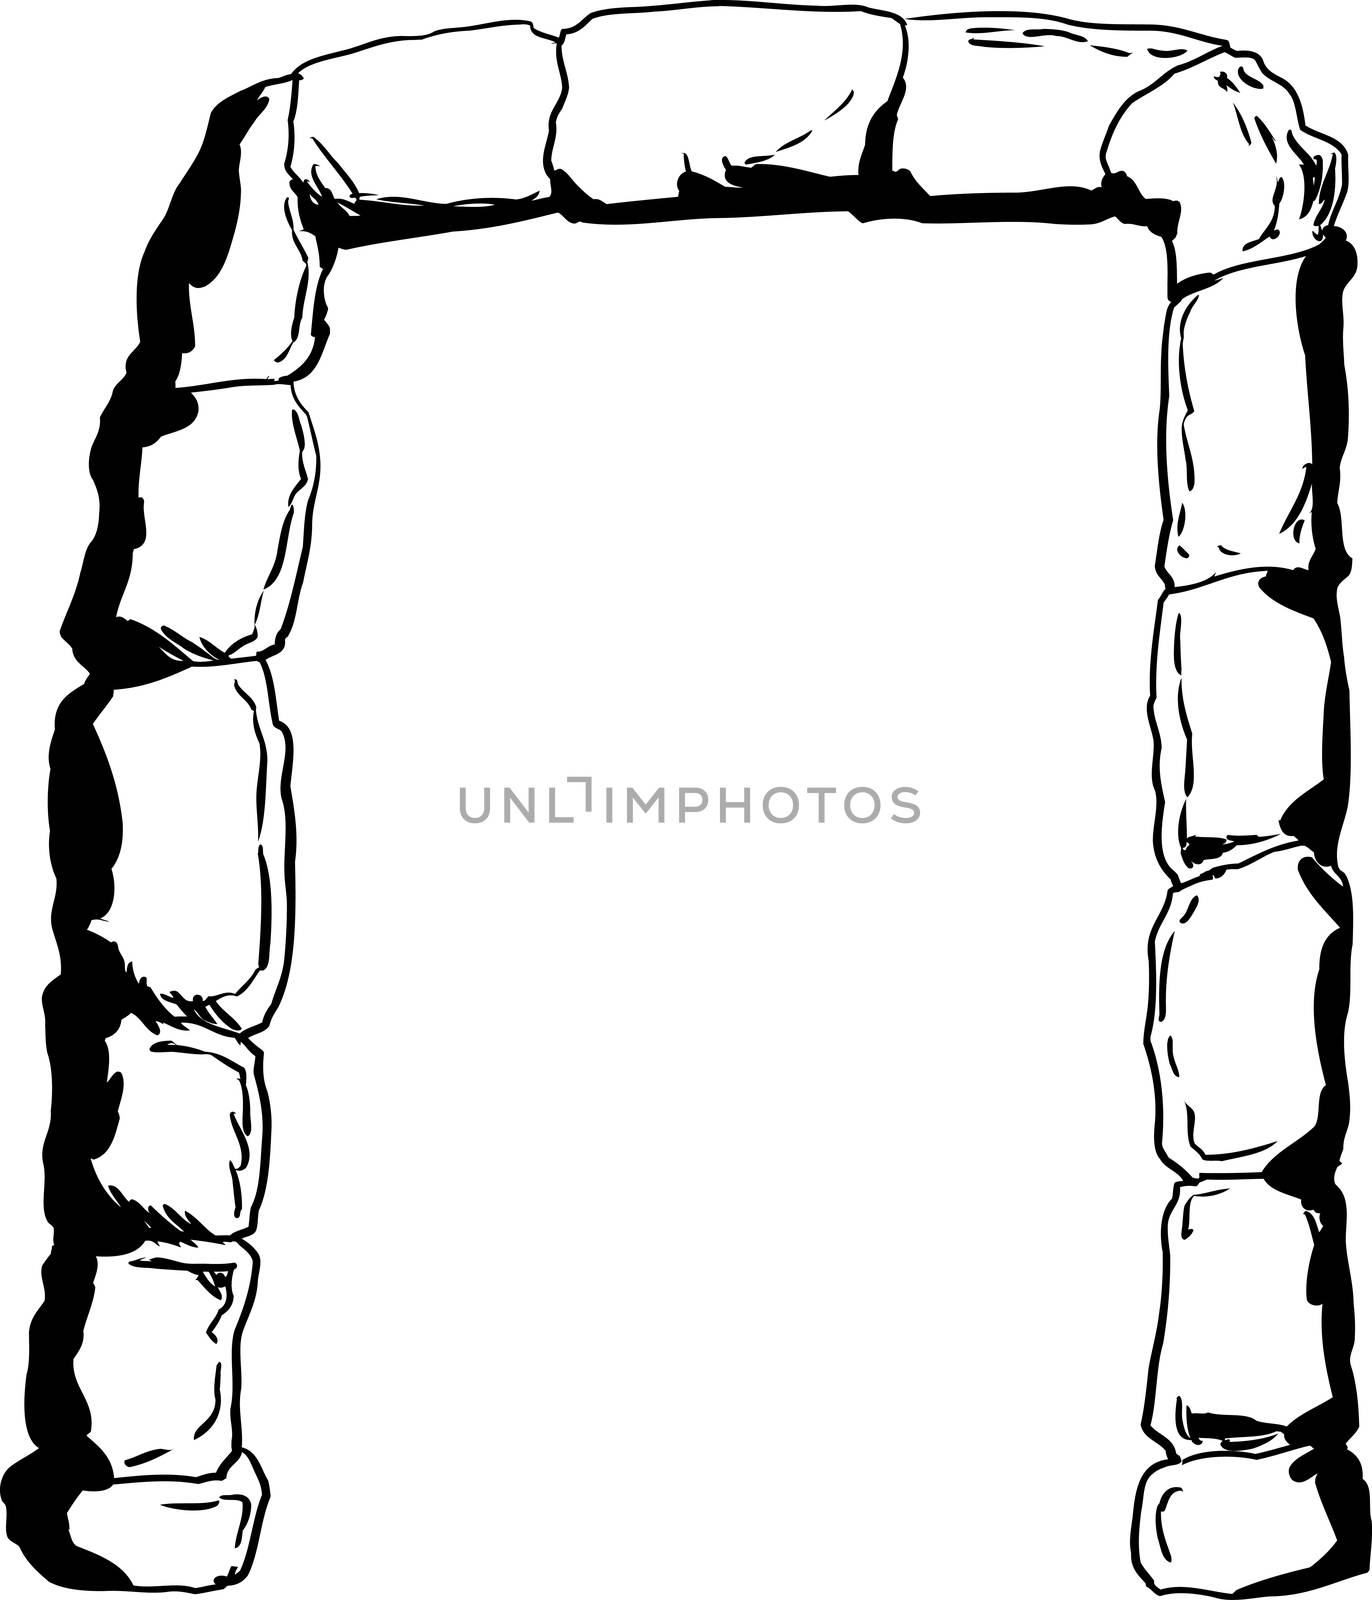 Stones in shape of an arch as portal or doorway outline illustration